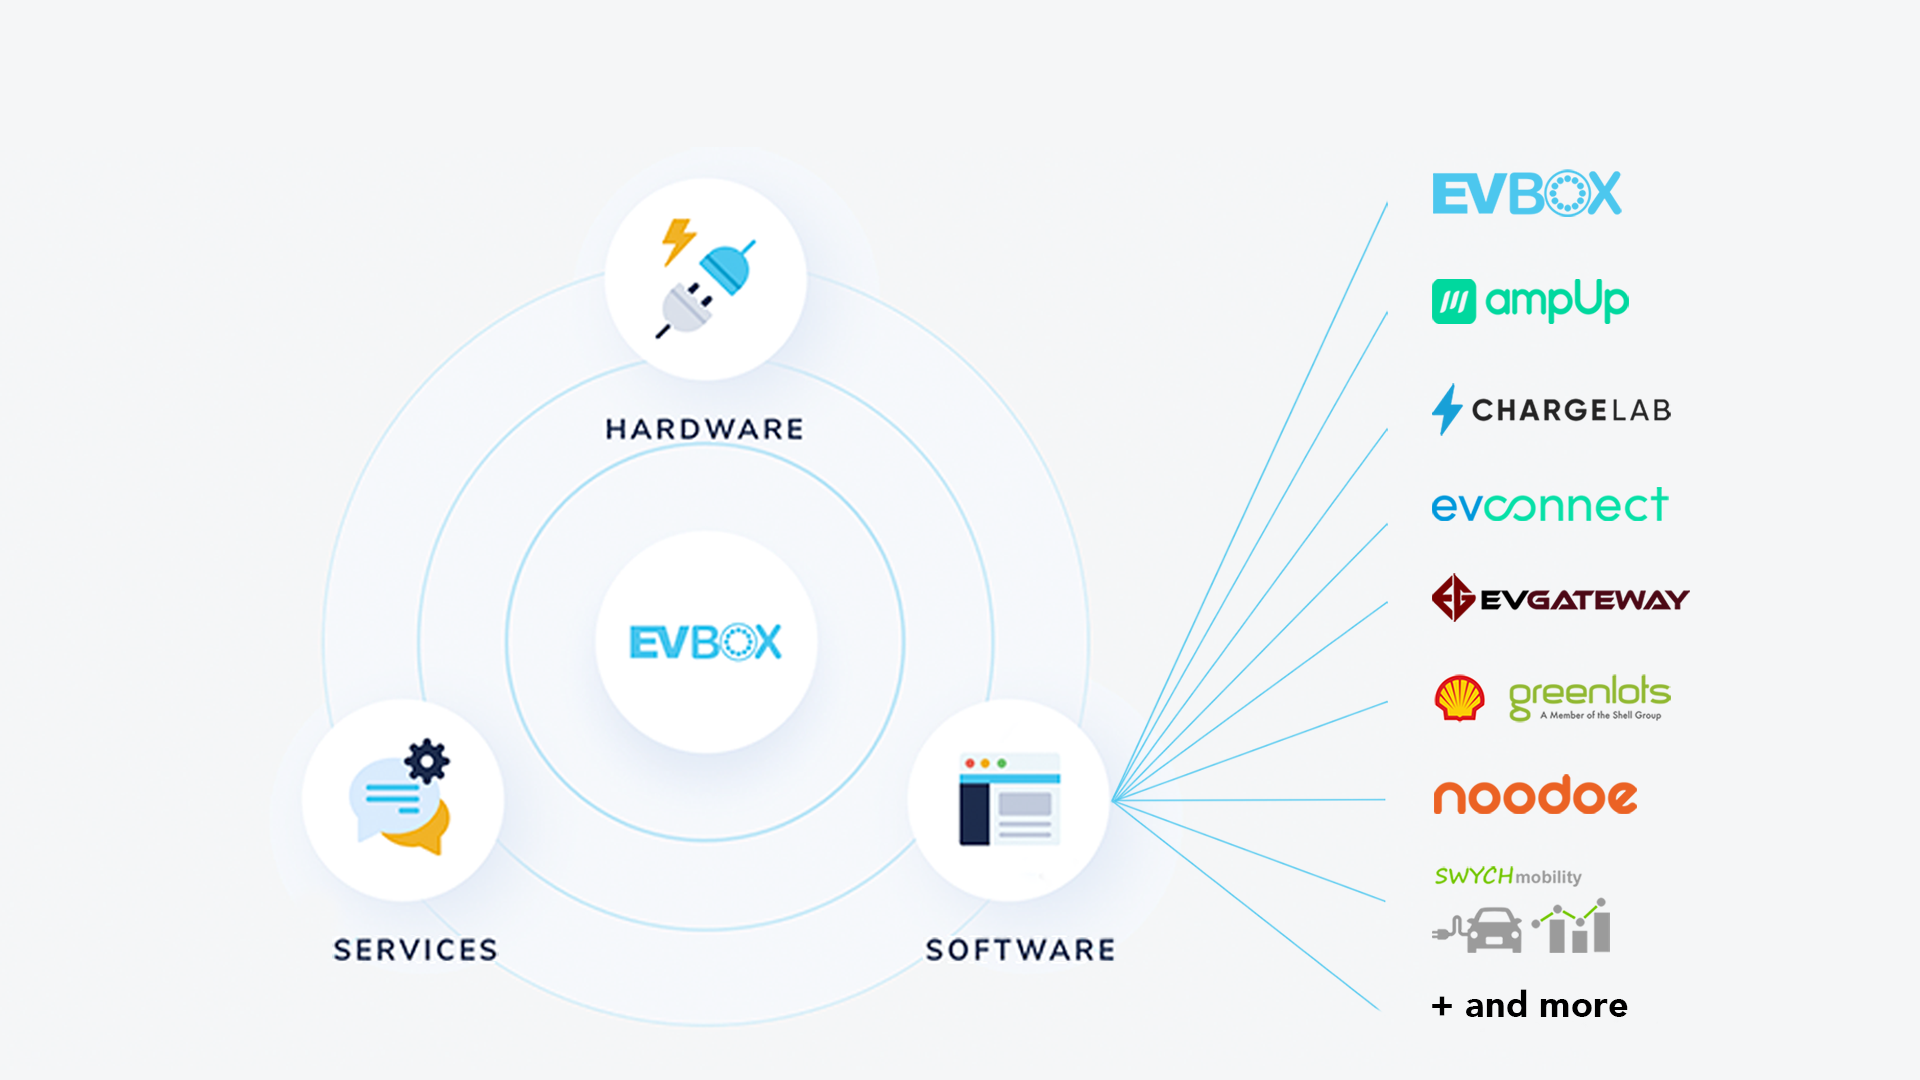 A visual that represents the EVBox  charging solution ecosystem consisting of Hardware, Services and Software. In this image, the software element is expended with examples of software providers that EVBox works with: AmpUp, Chargelab, EVconnect, EVGATEWAY, Greenlots, Noodoe, SWYCHmobility, and more.